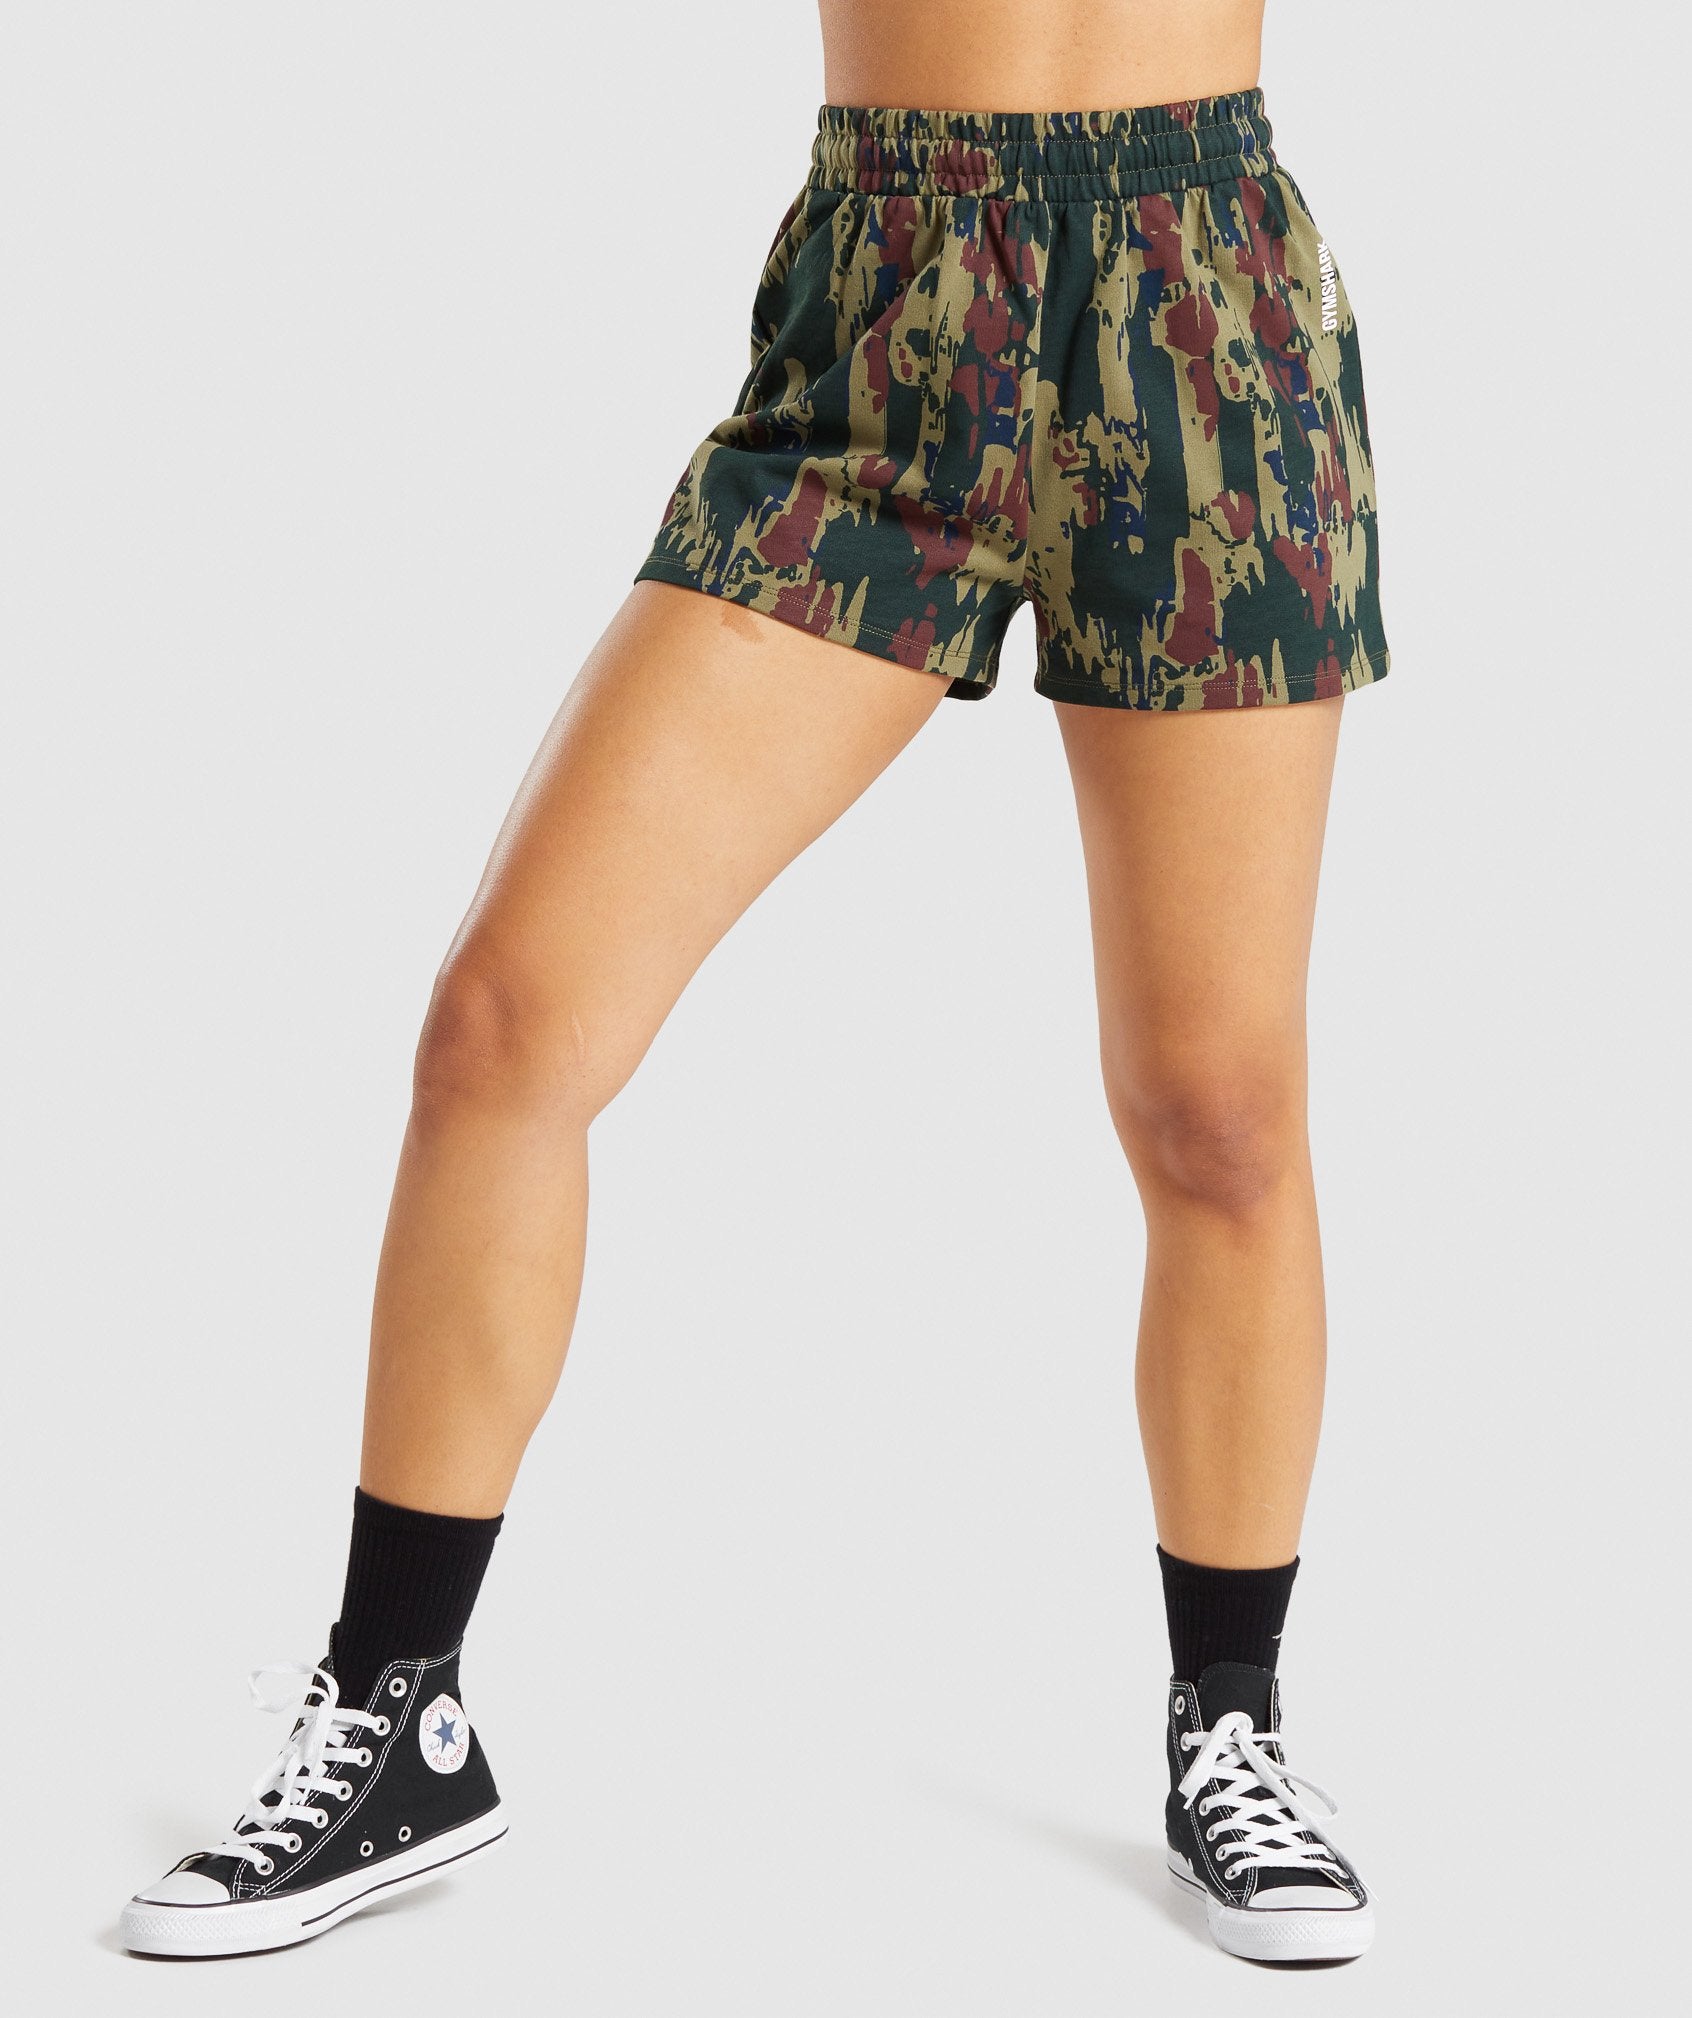 GymShark Womens Activewears Shorts Green Camo Stretchy No Size